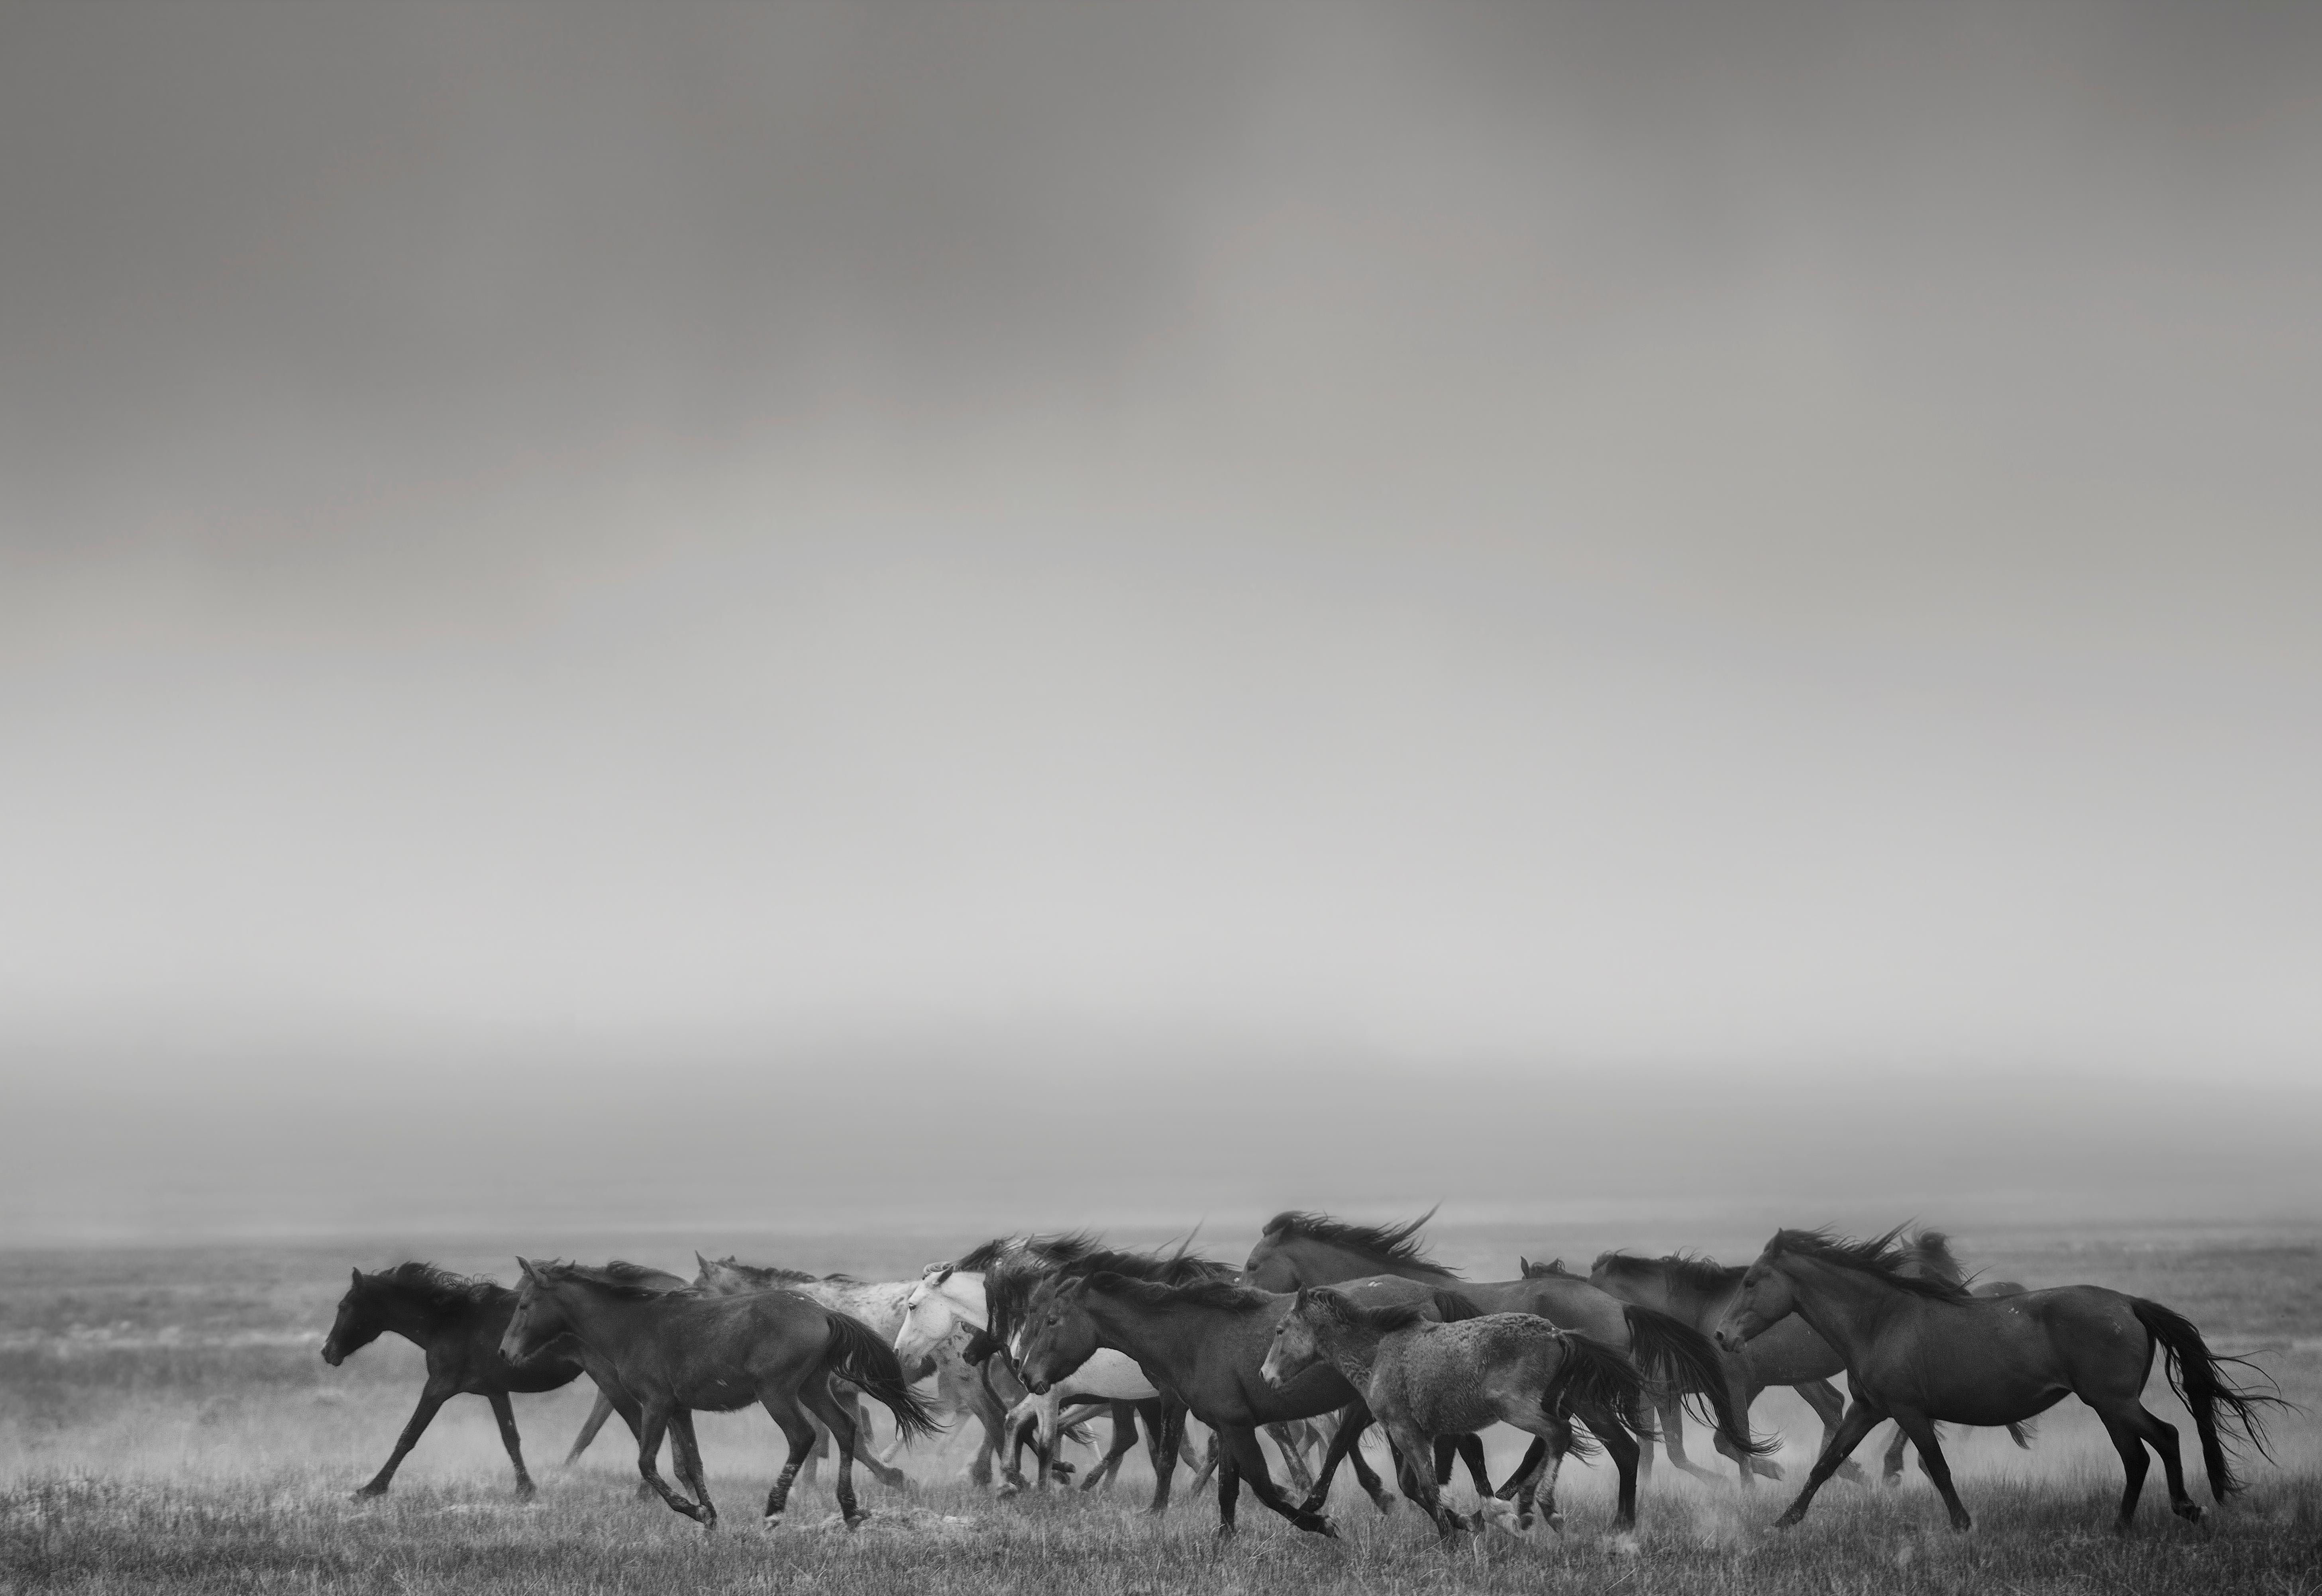 Shane Russeck Animal Print - Black and White Photography of Wild Horses "Dream State" - 50x60  Mustangs 